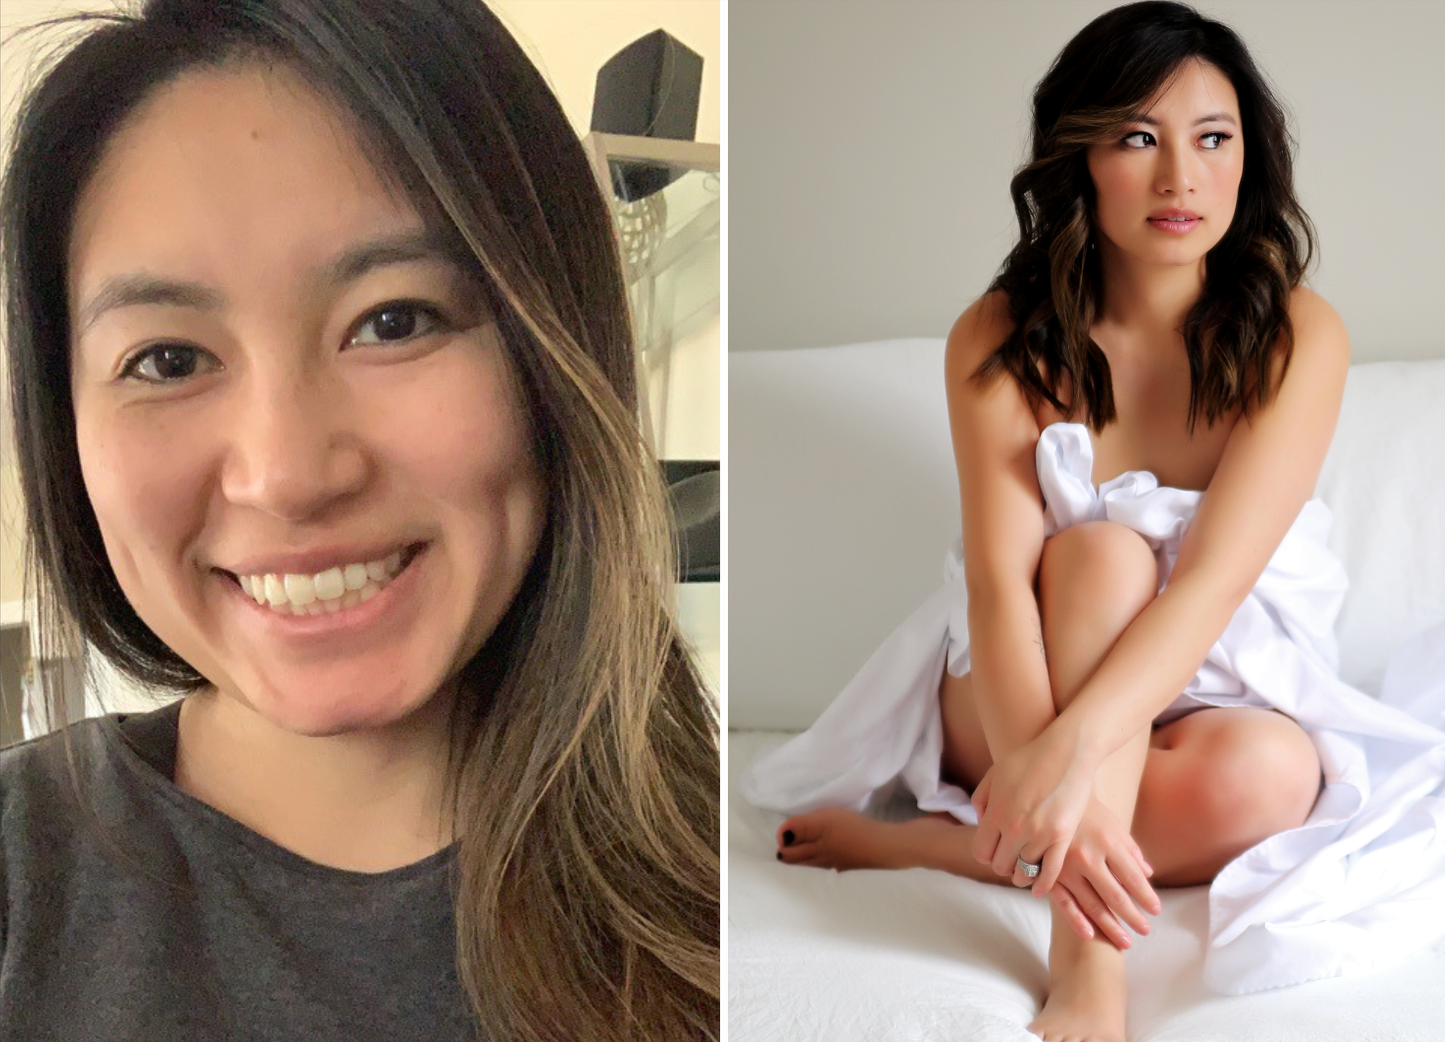 Split image/before and after: on the left, a smiling Asian woman with long dark hair in a casual gray t-shirt. On the right, the same woman posing thoughtfully in a white sheet main-street-boudoir